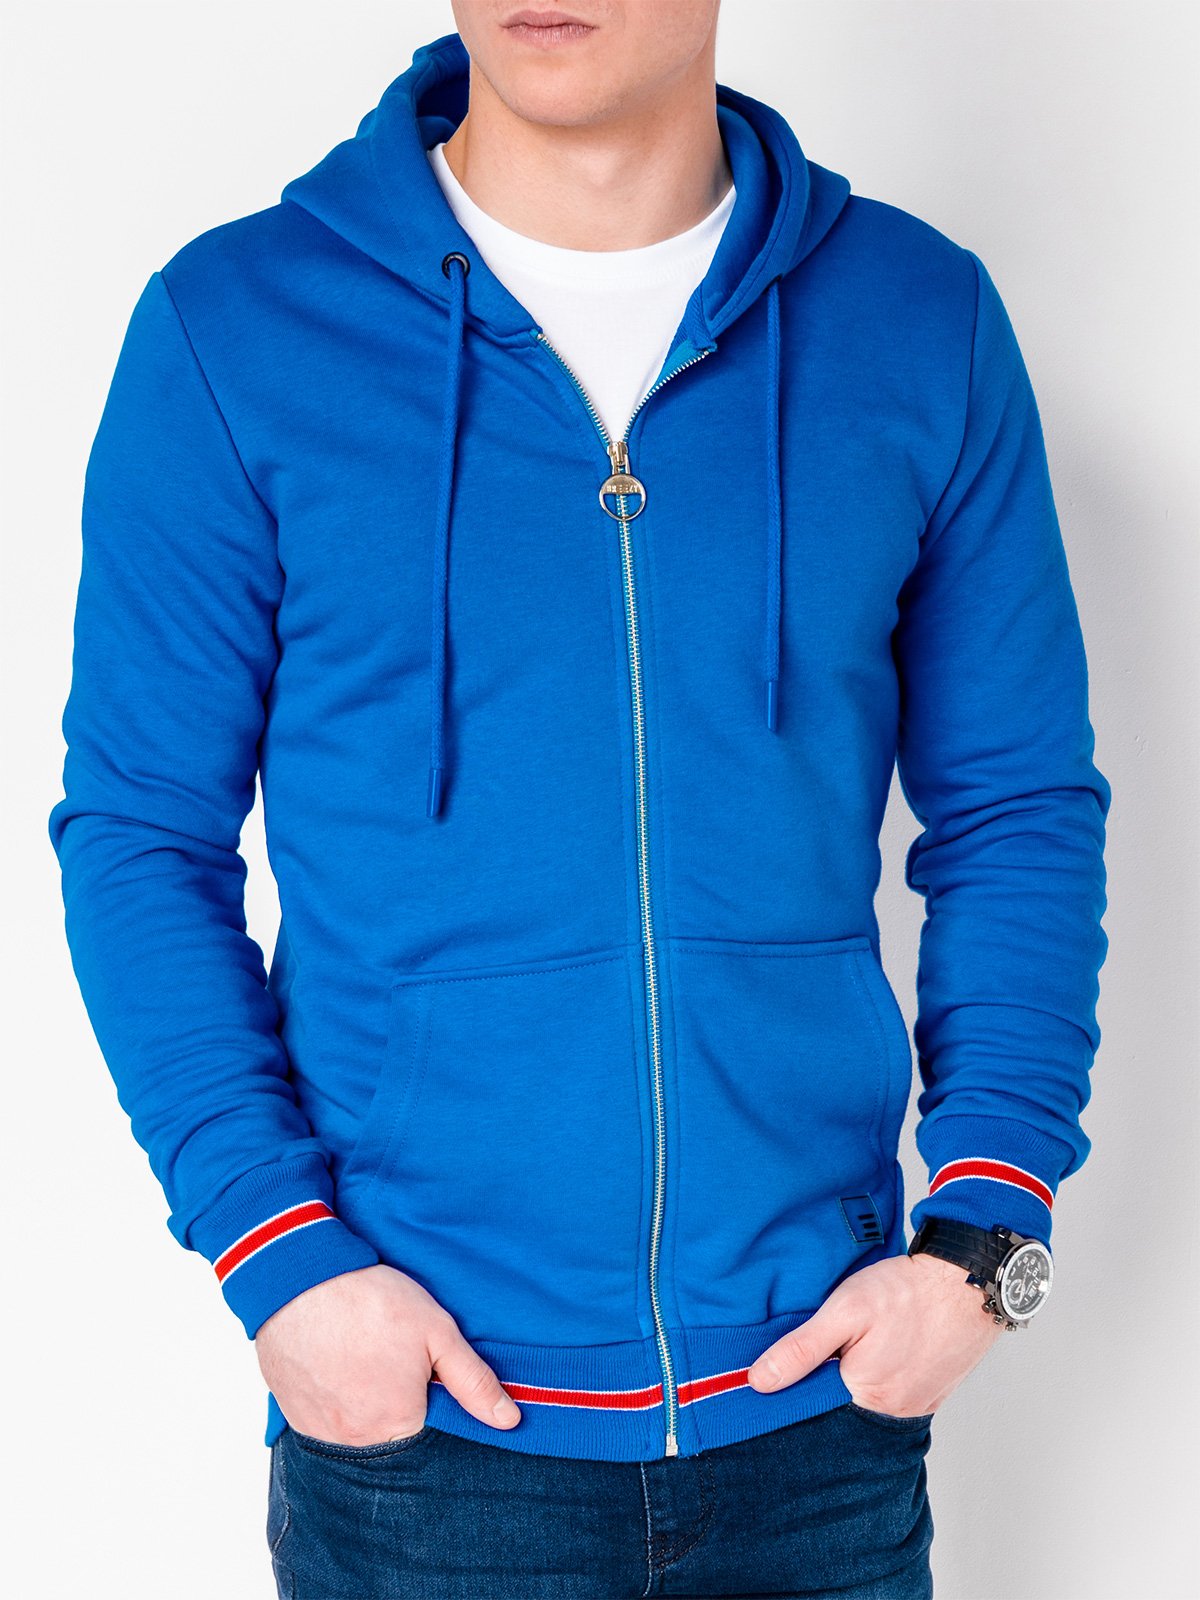 Men's zip-up hoodie B912 - turquoise | MODONE wholesale - Clothing For Men